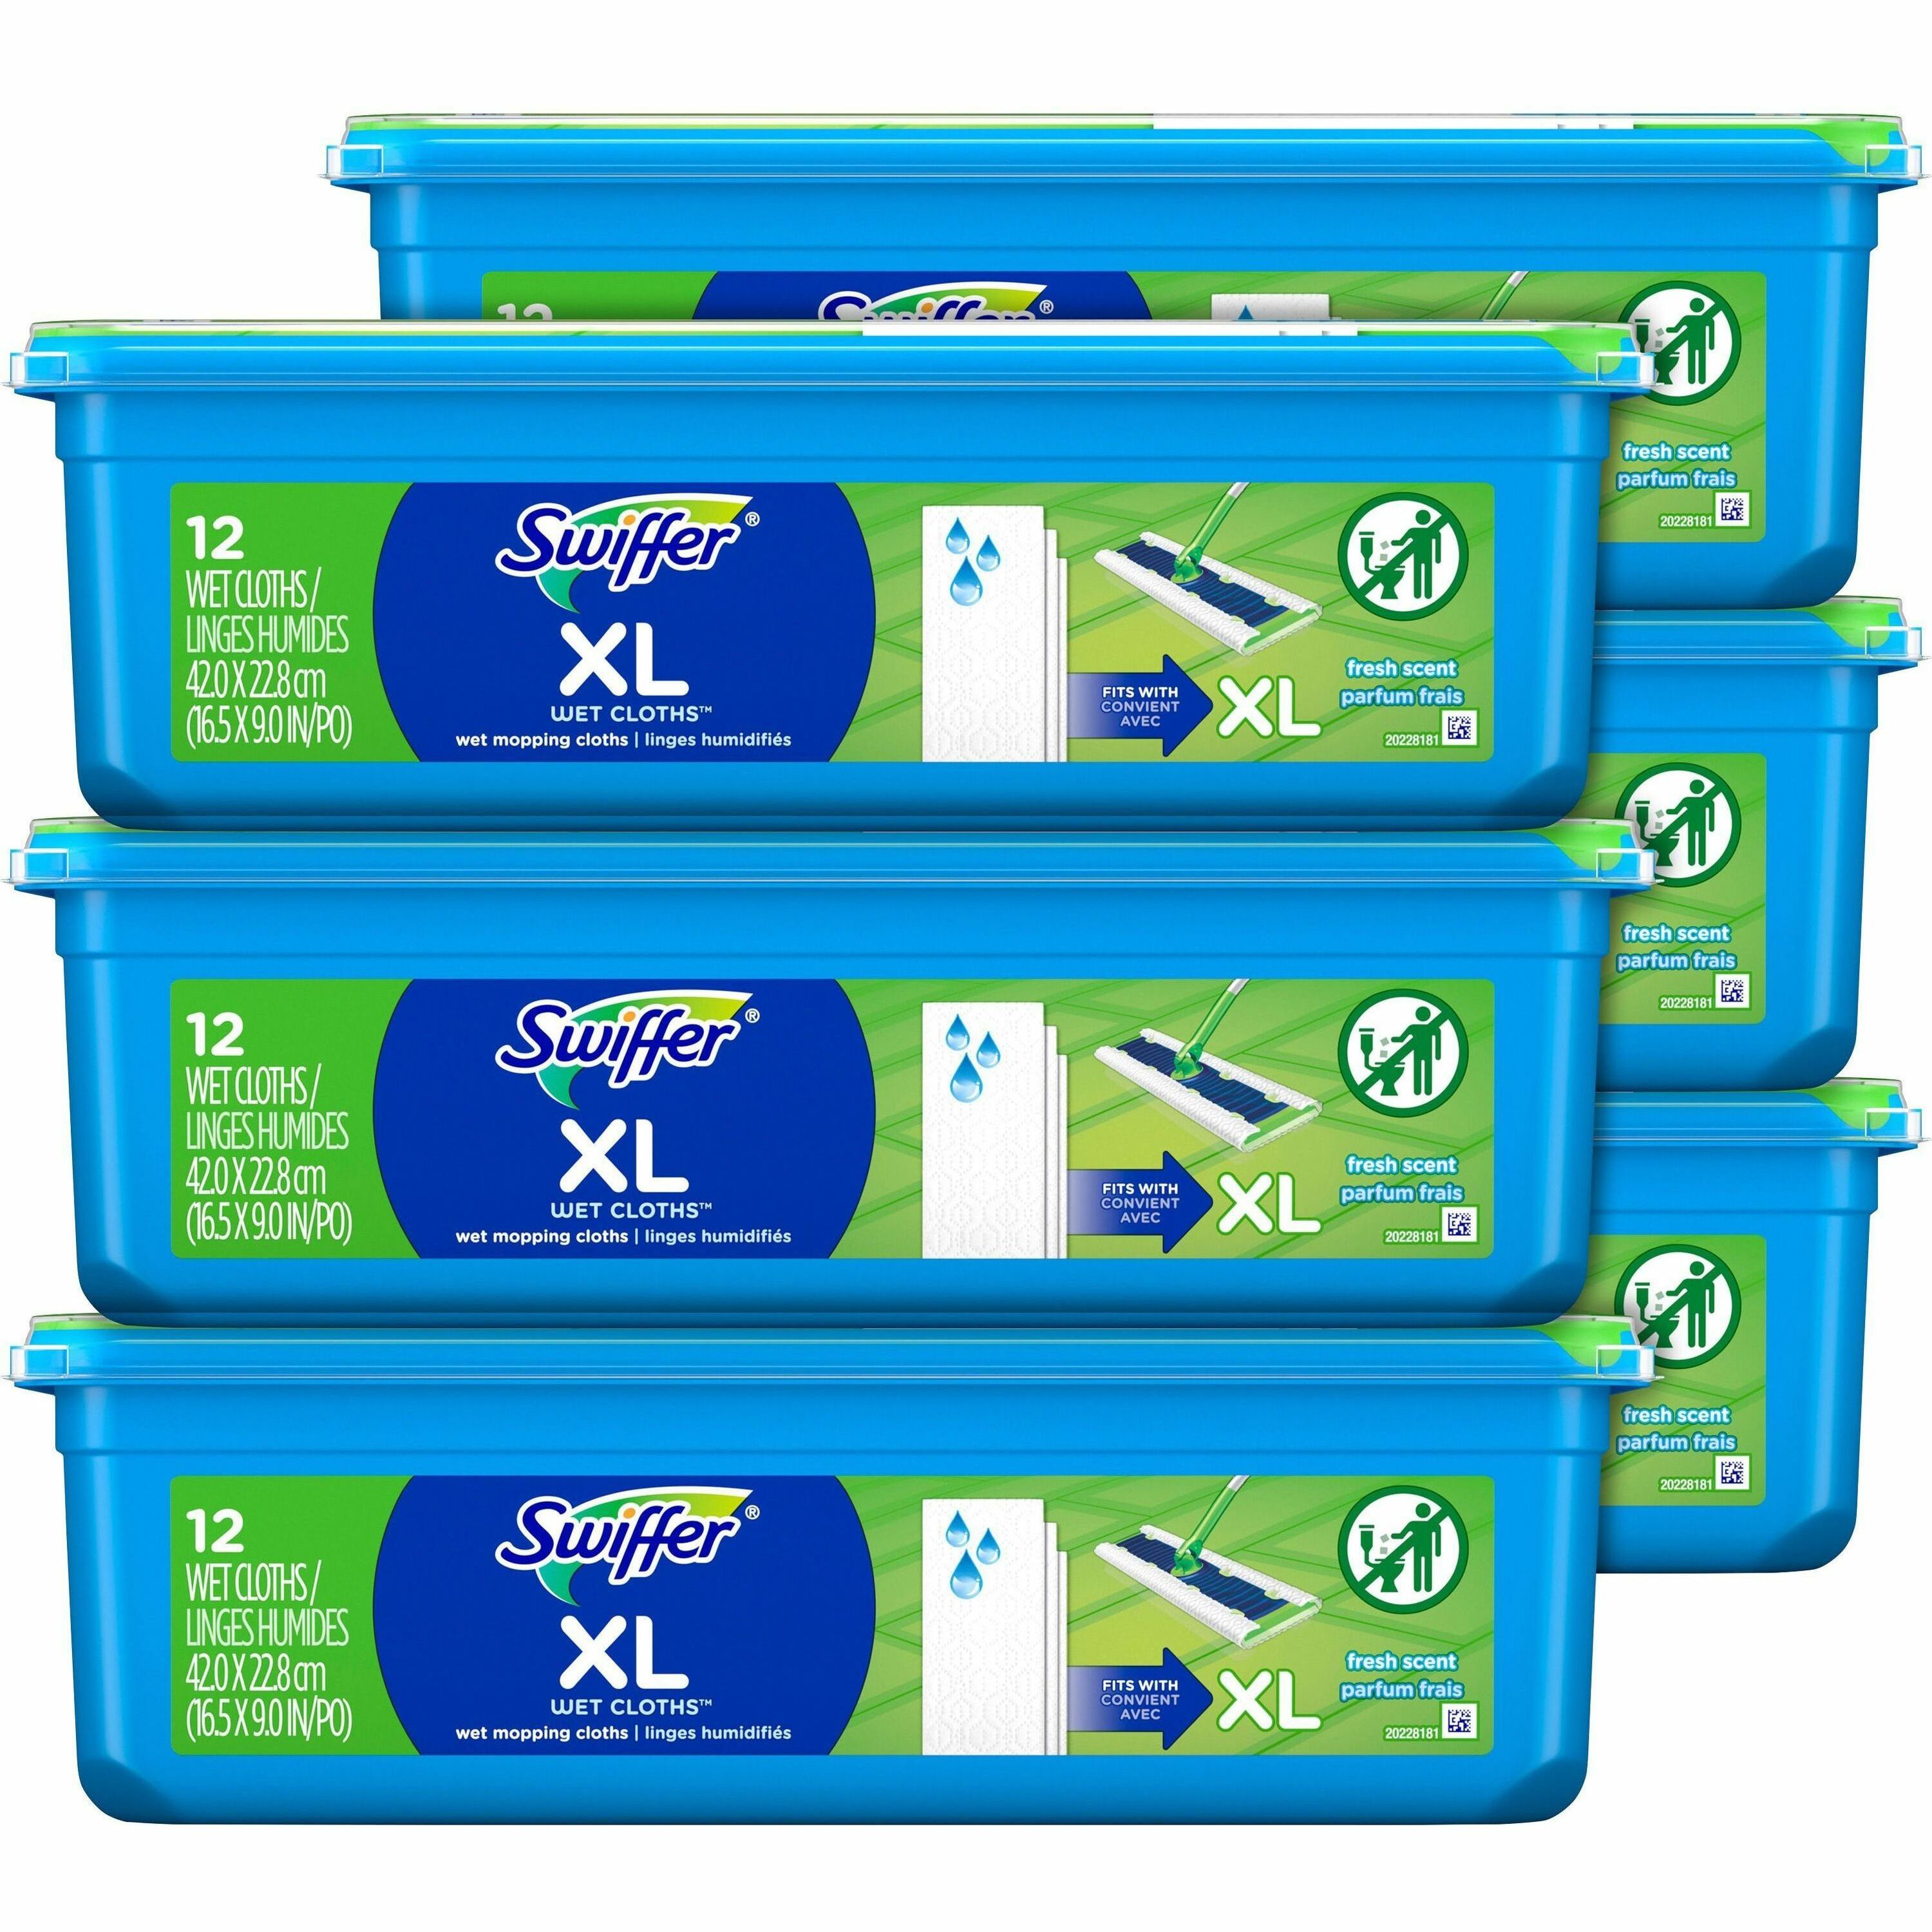 swiffer-sweeper-xl-wet-mopping-pads-x-large-white-12-per-pack-6-carton_pgc74471ct - 1